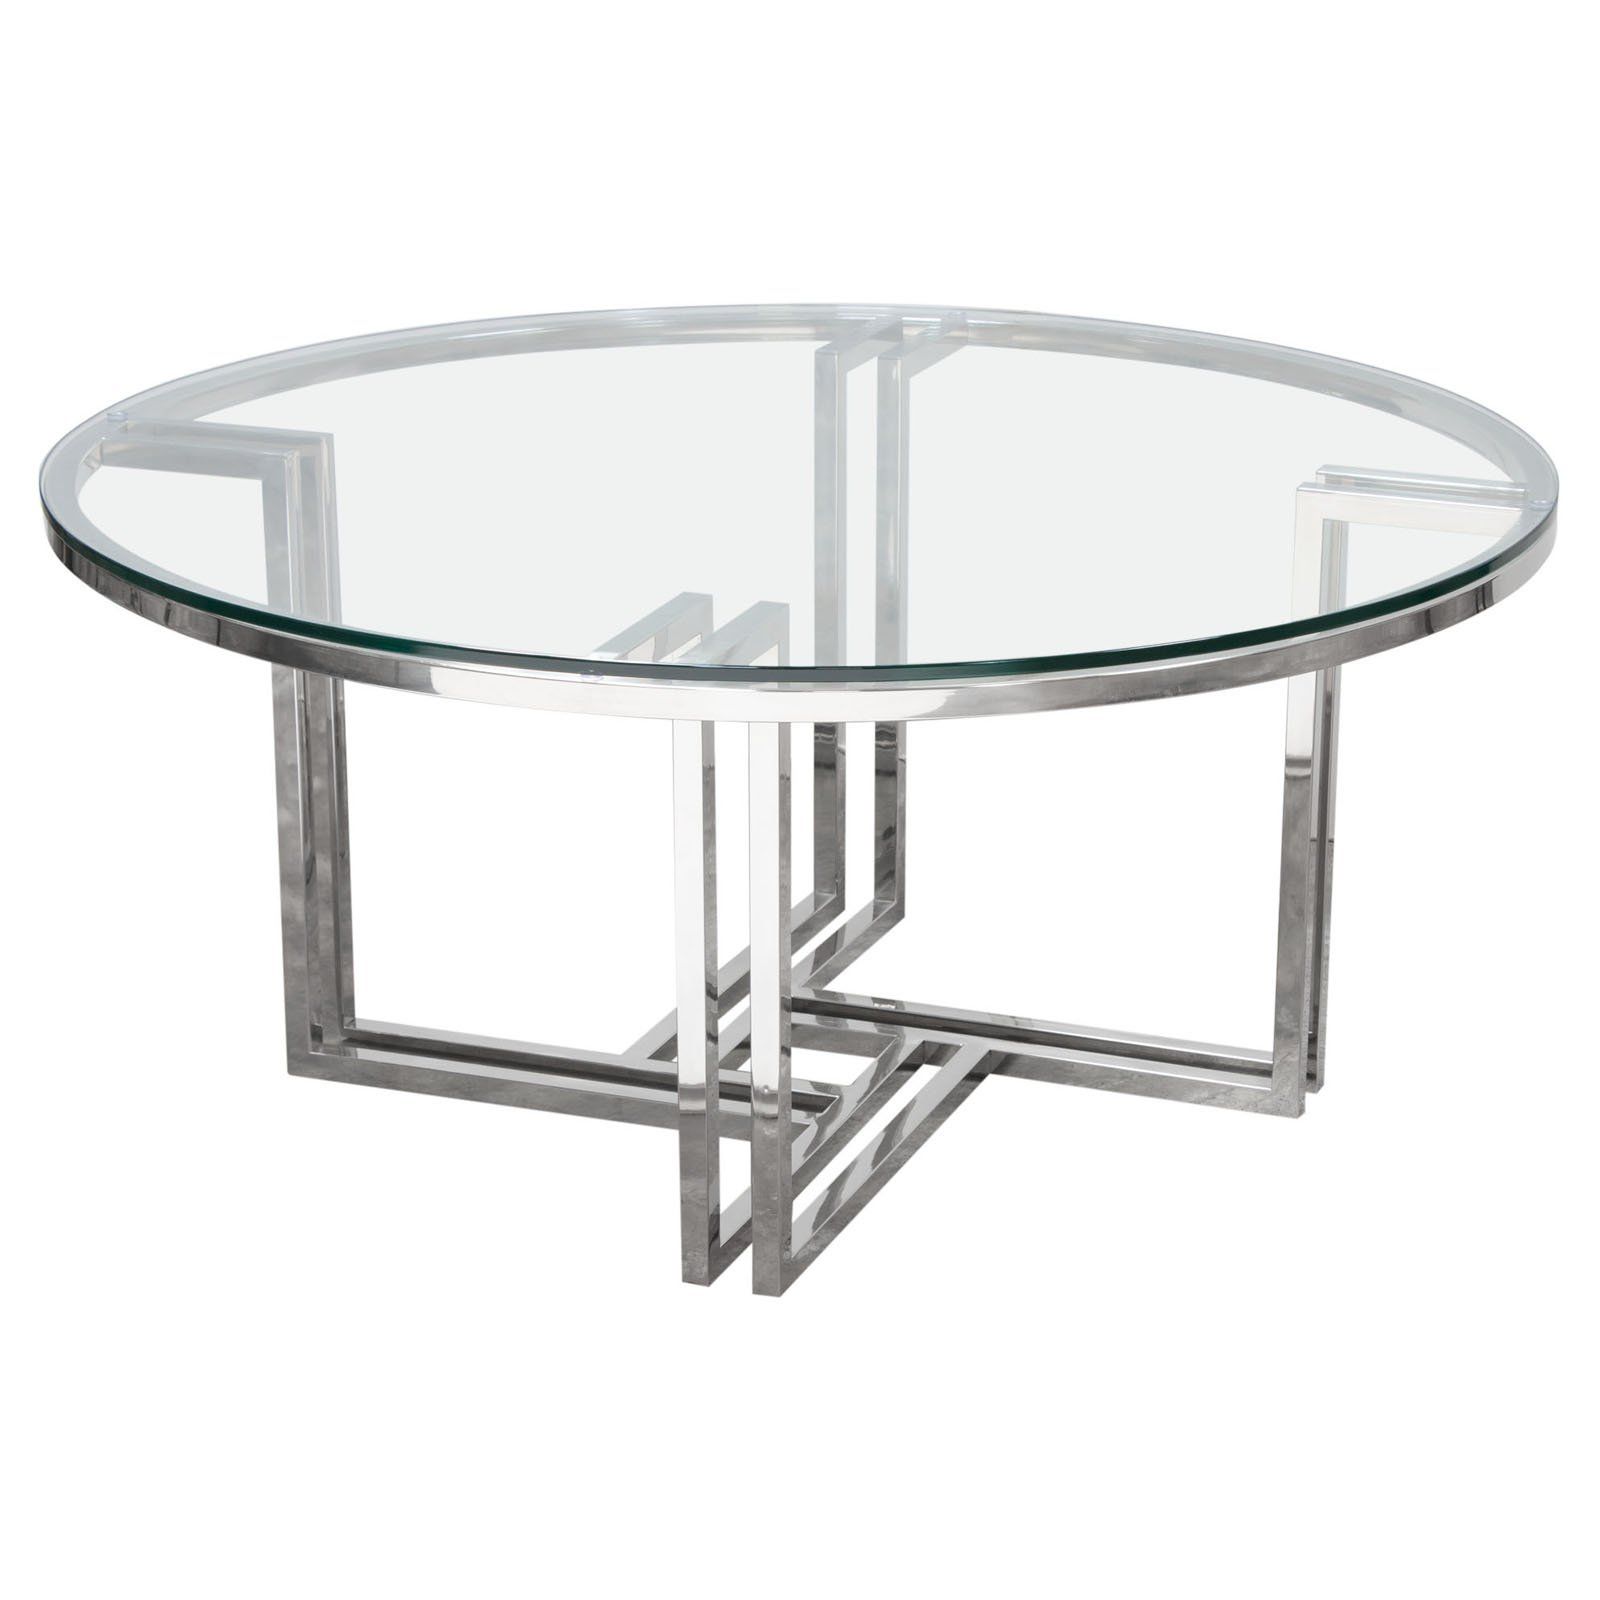 Polished Chrome Round Cocktail Tables Pertaining To Trendy Diamond Sofa Deko Polished Stainless Steel Round Cocktail Table With (View 3 of 10)